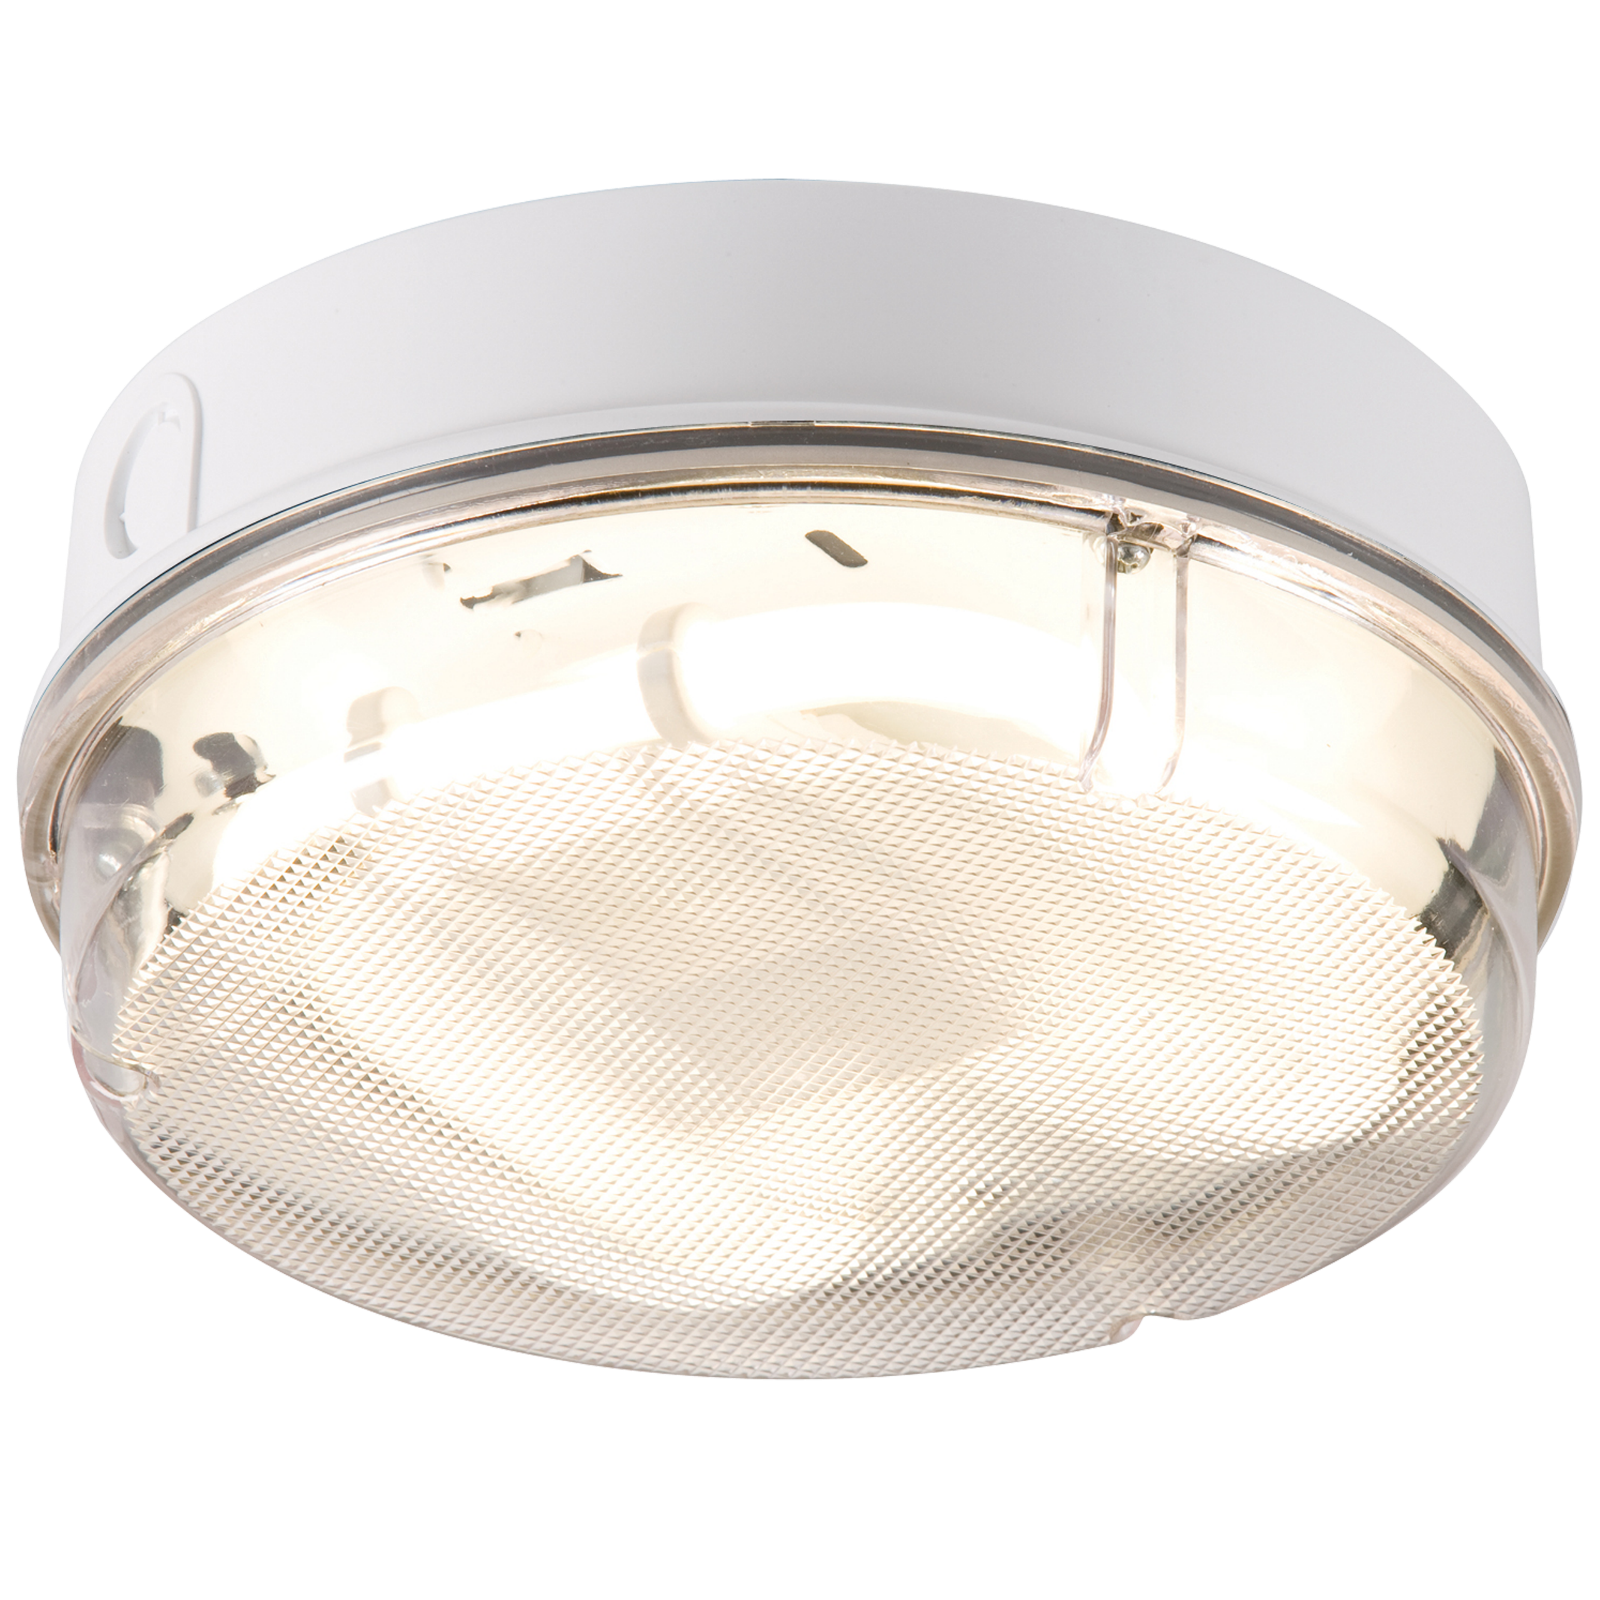 IP65 28W HF Round Polycarbonate Bulkhead With Prismatic White Diffuser - TPR28WPHF 